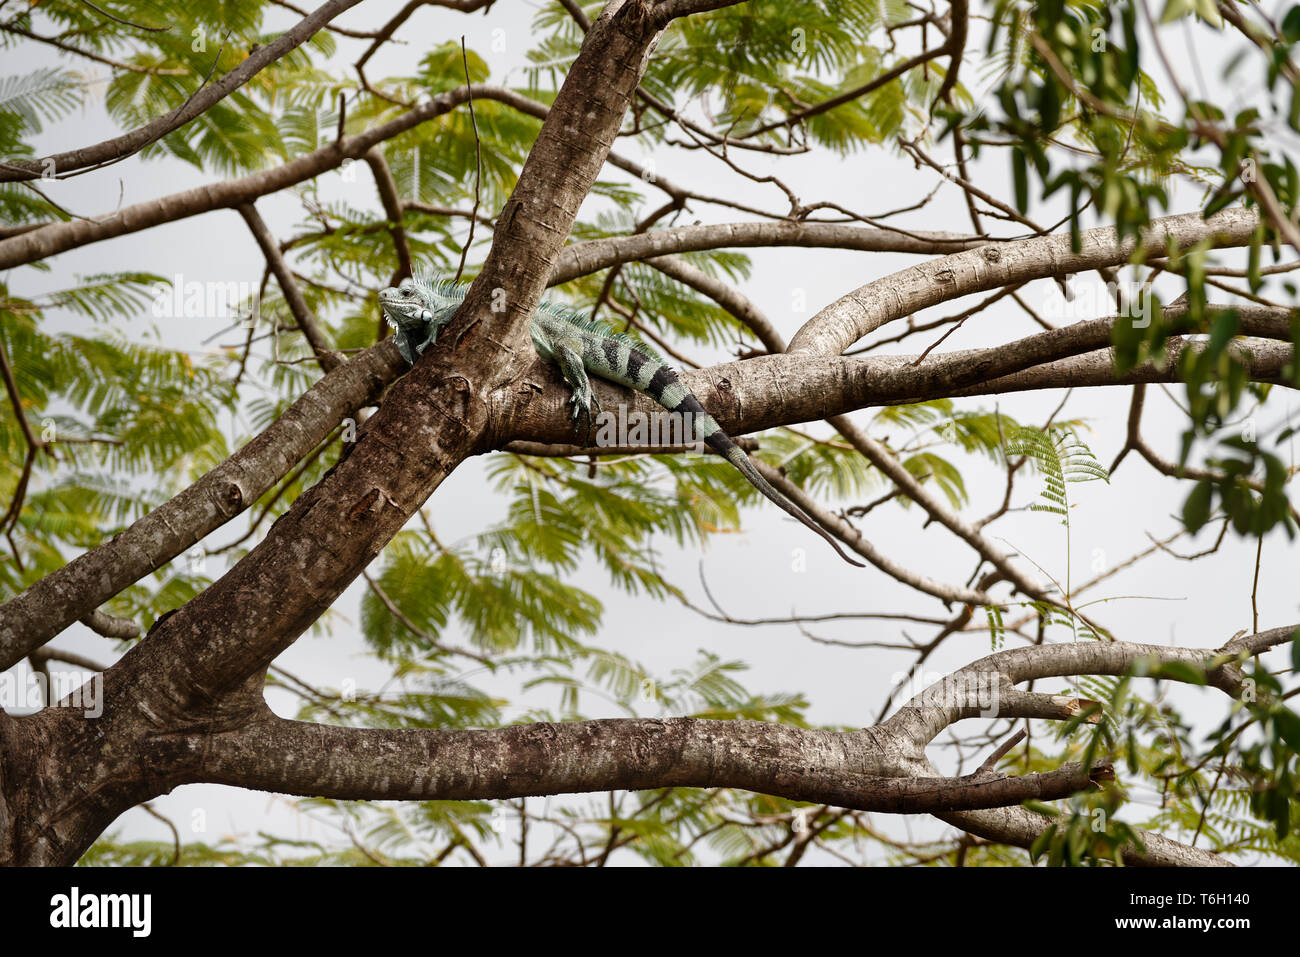 A large Iguana (Iguanidae) in the crown of a large tree, it is placed on a branch fork, set against the background - Location: Caribbean, Guadeloupe Stock Photo